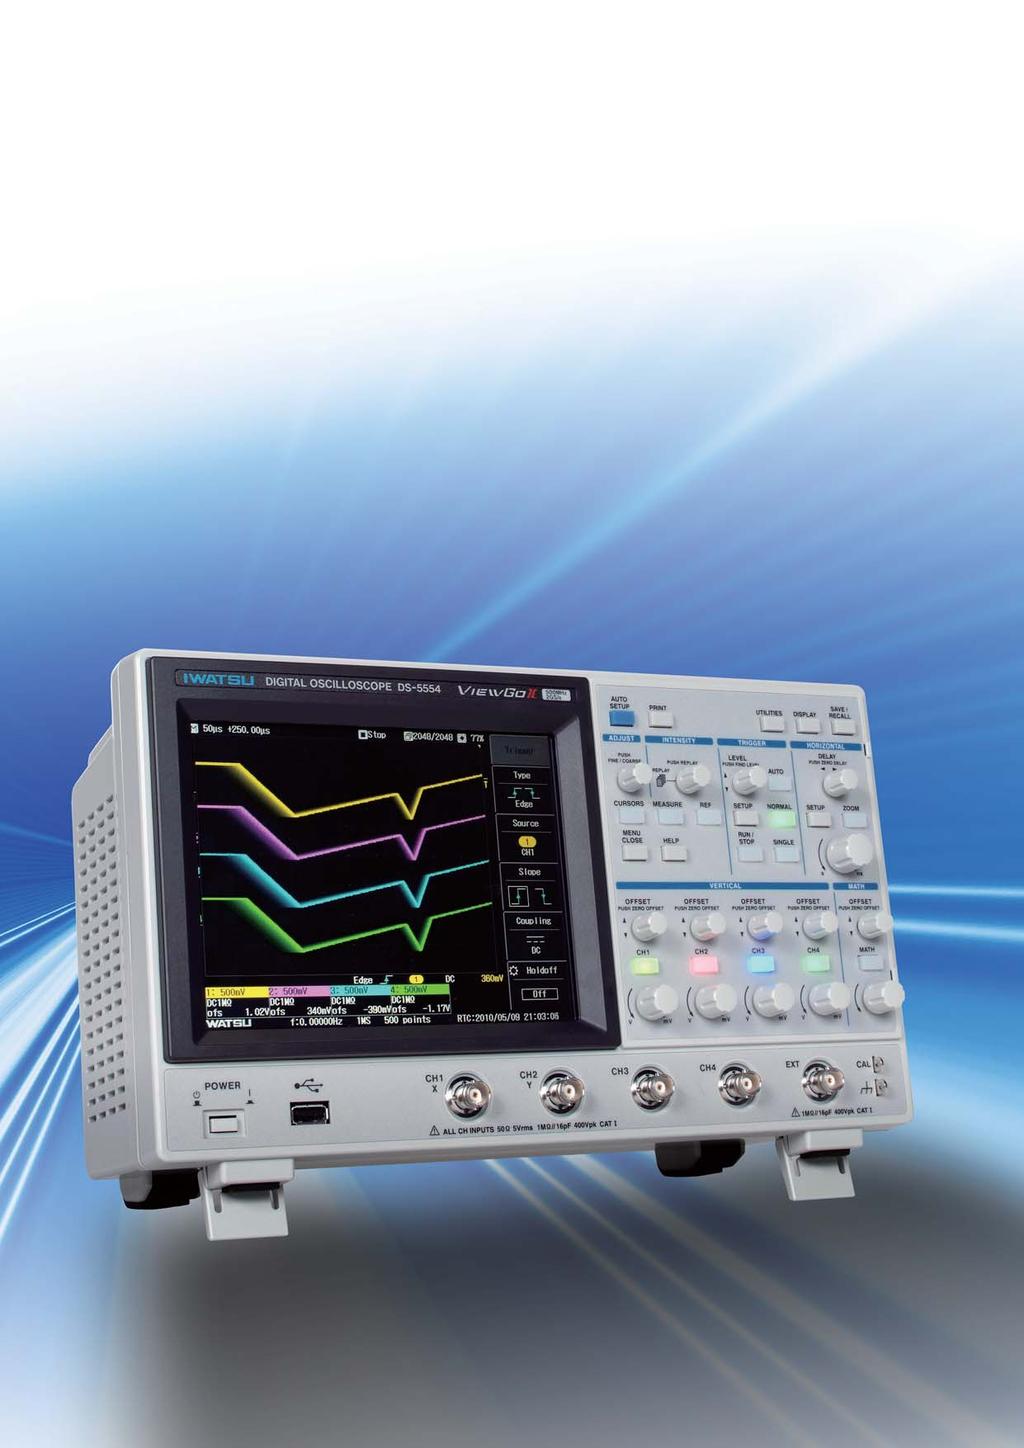 Provides Ultimate Performance. The observation of signal waveforms is the most important function of oscilloscopes.